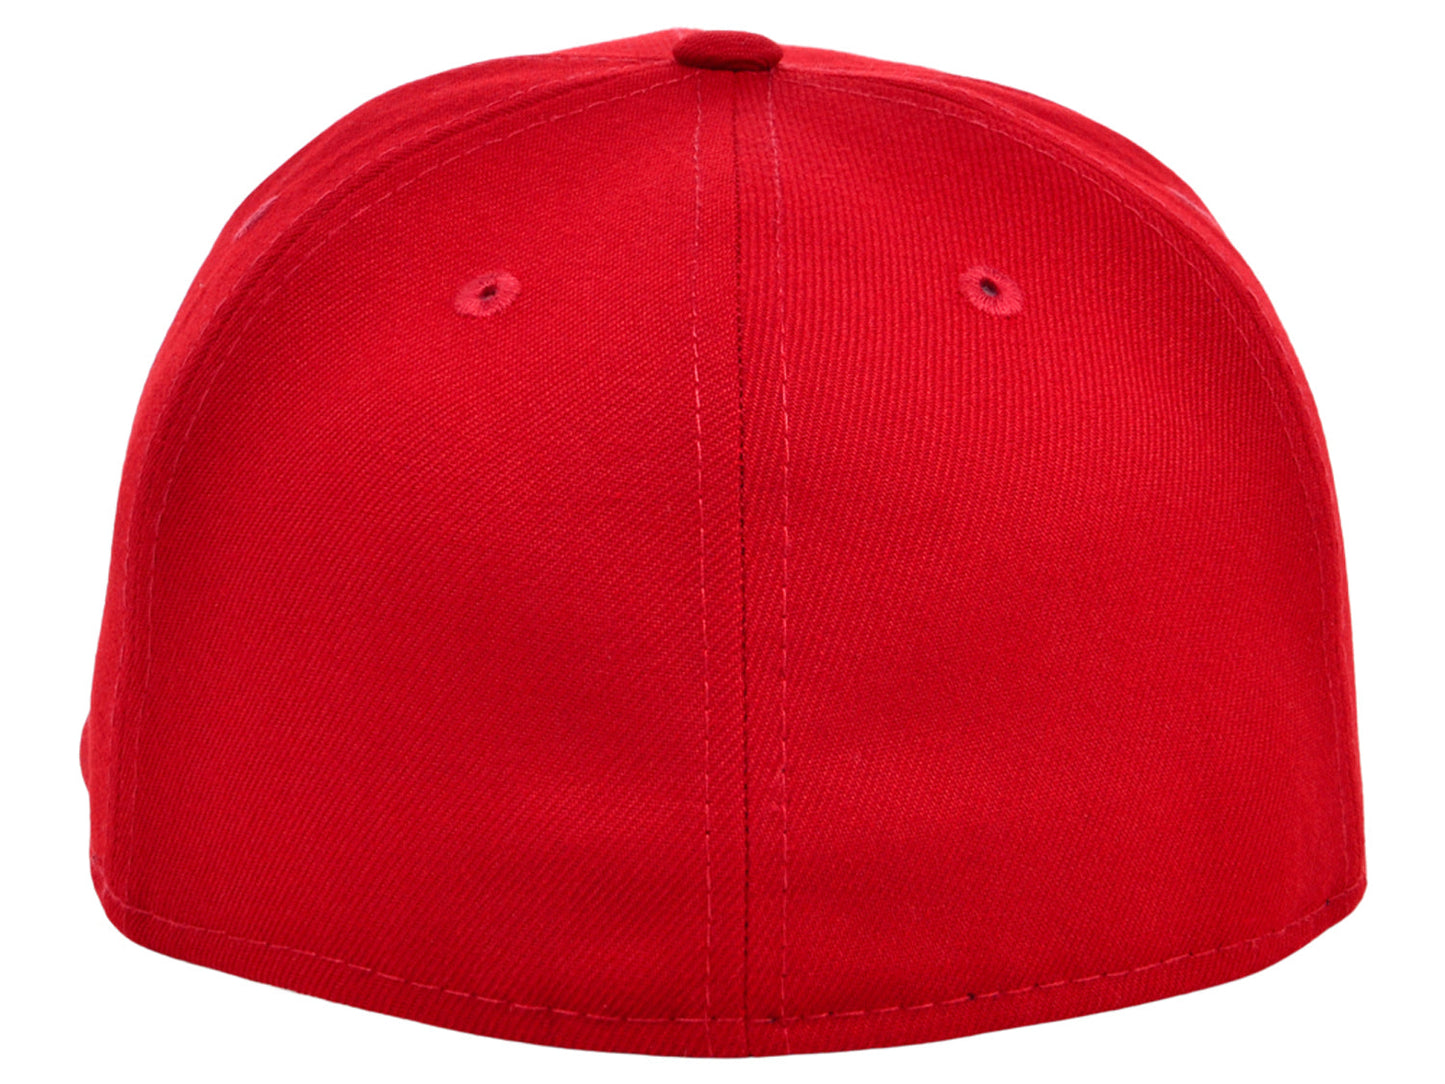 Crowns by Lids Full Court Fitted Cap - Red 700